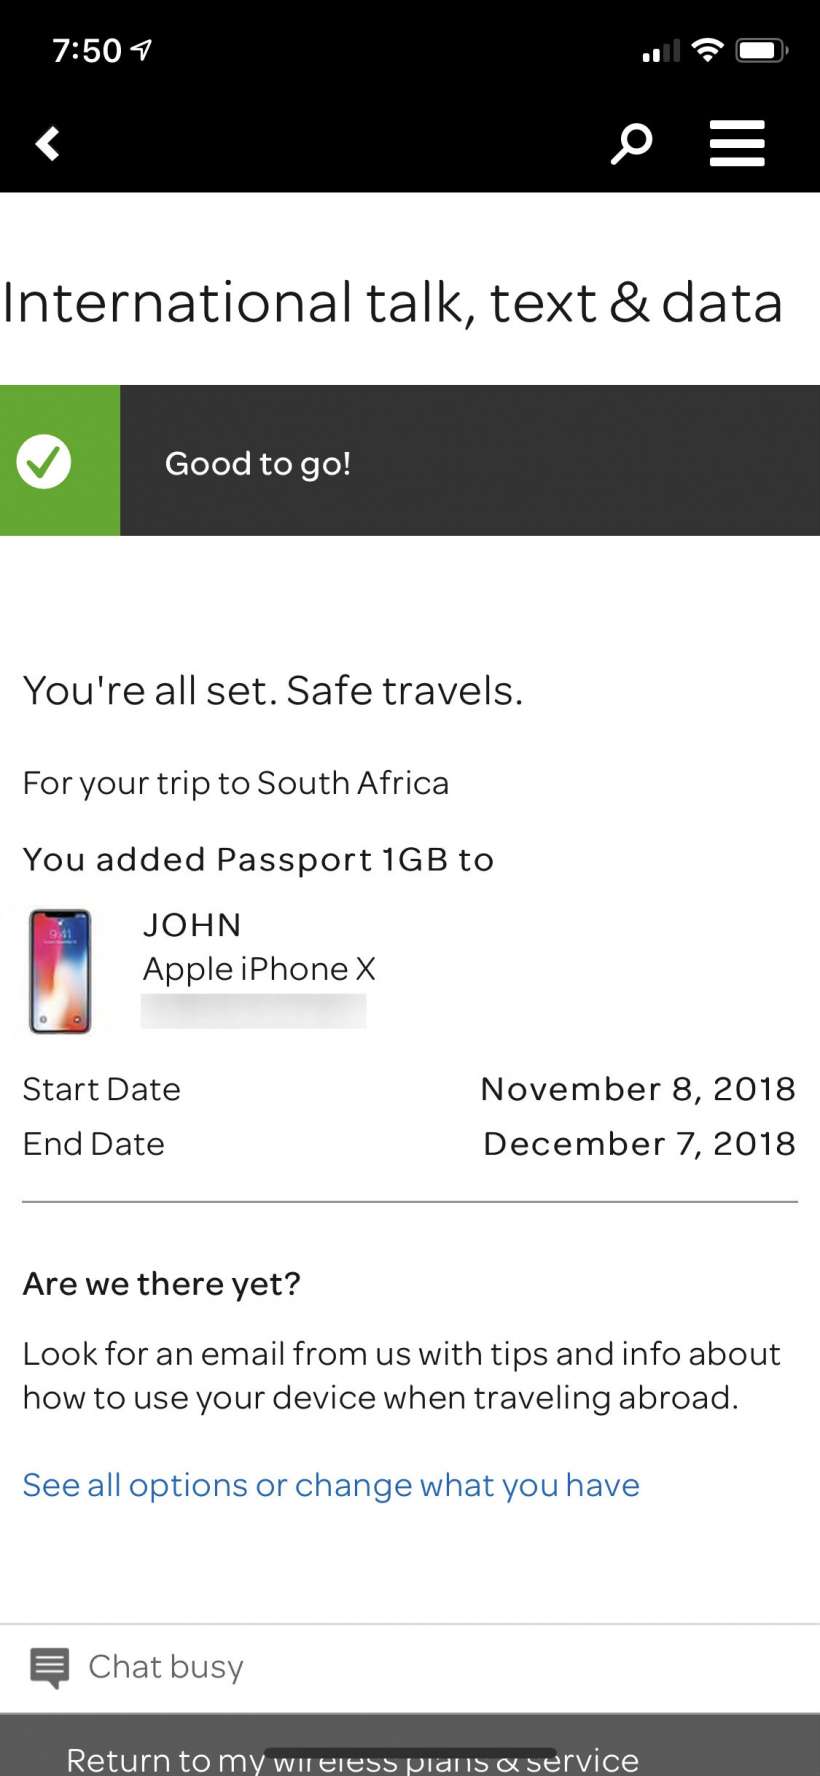 How to sign up for AT&T Passport for international travel on iPhone.